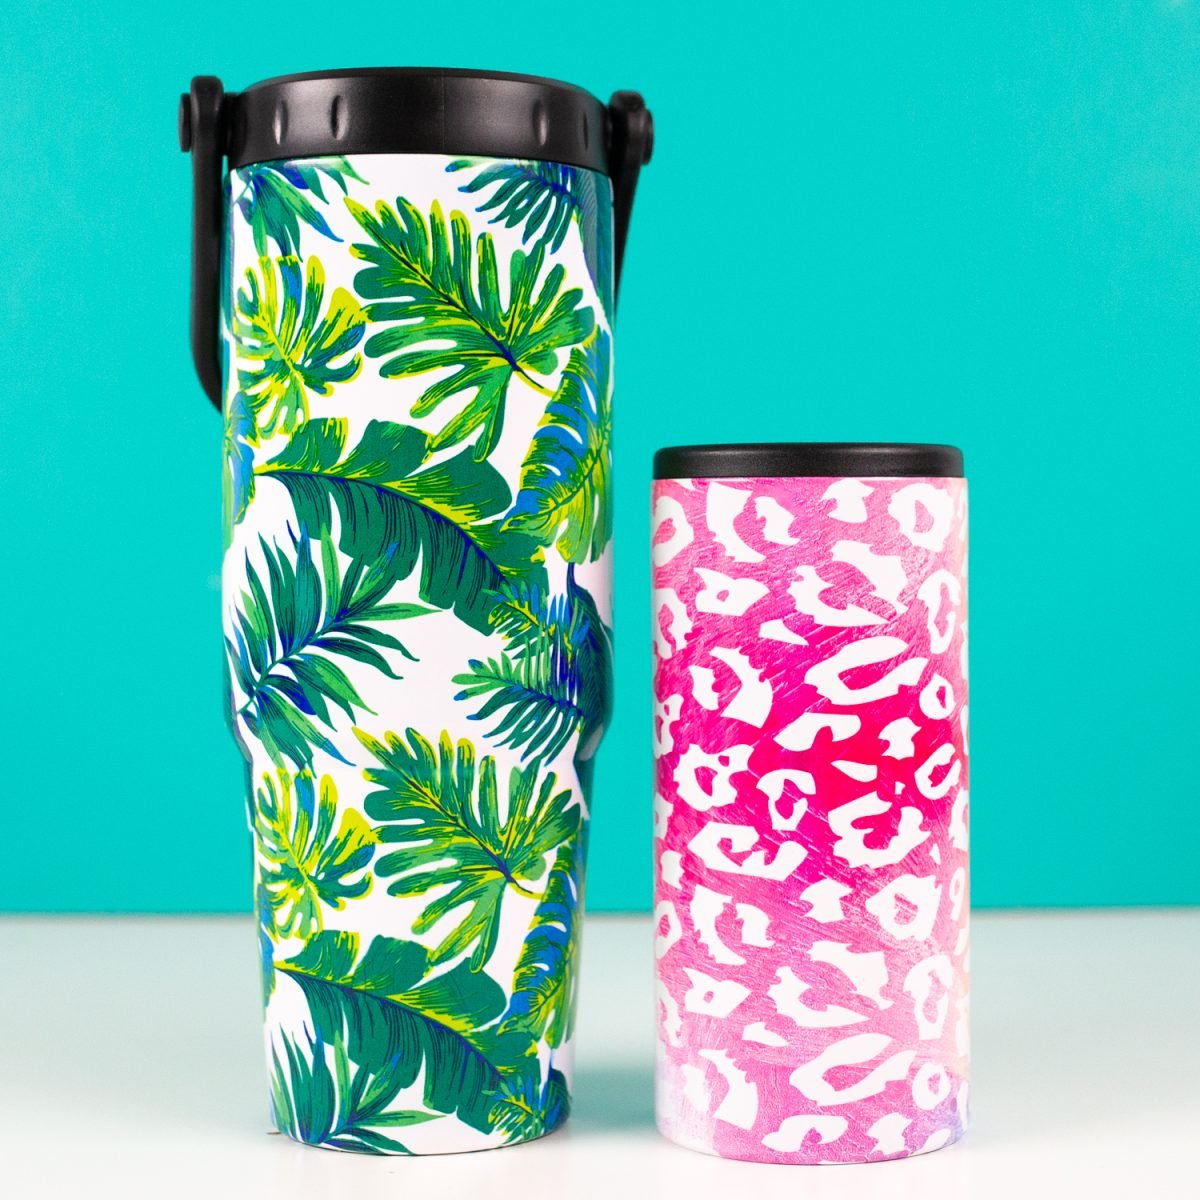 Final leaf and leopard sublimation tumblers on teal background